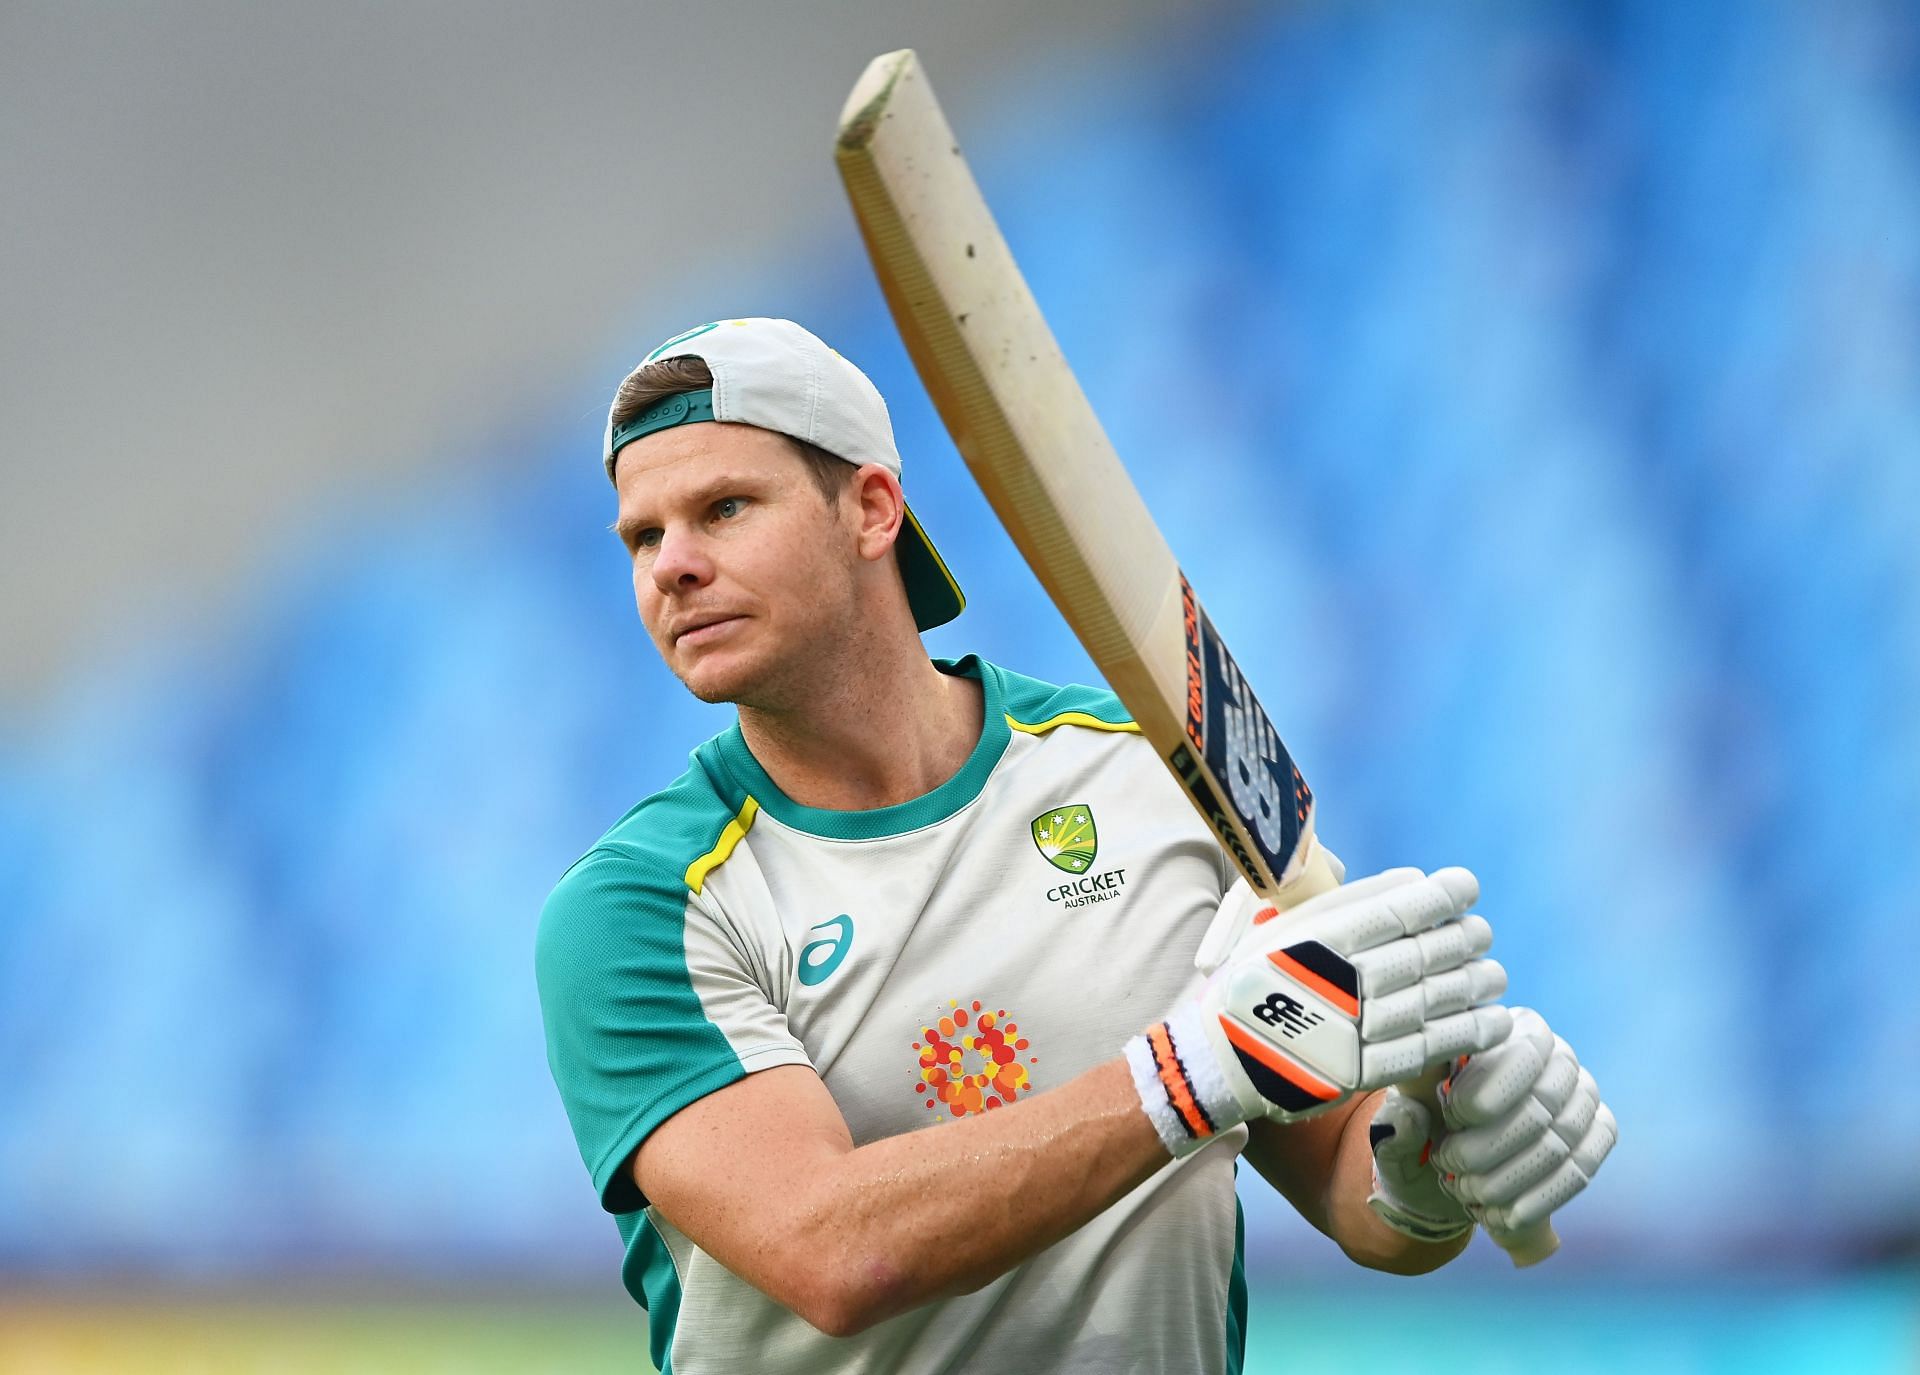 Steve Smith is due for a big score for Australia in the T20 World Cup 2021